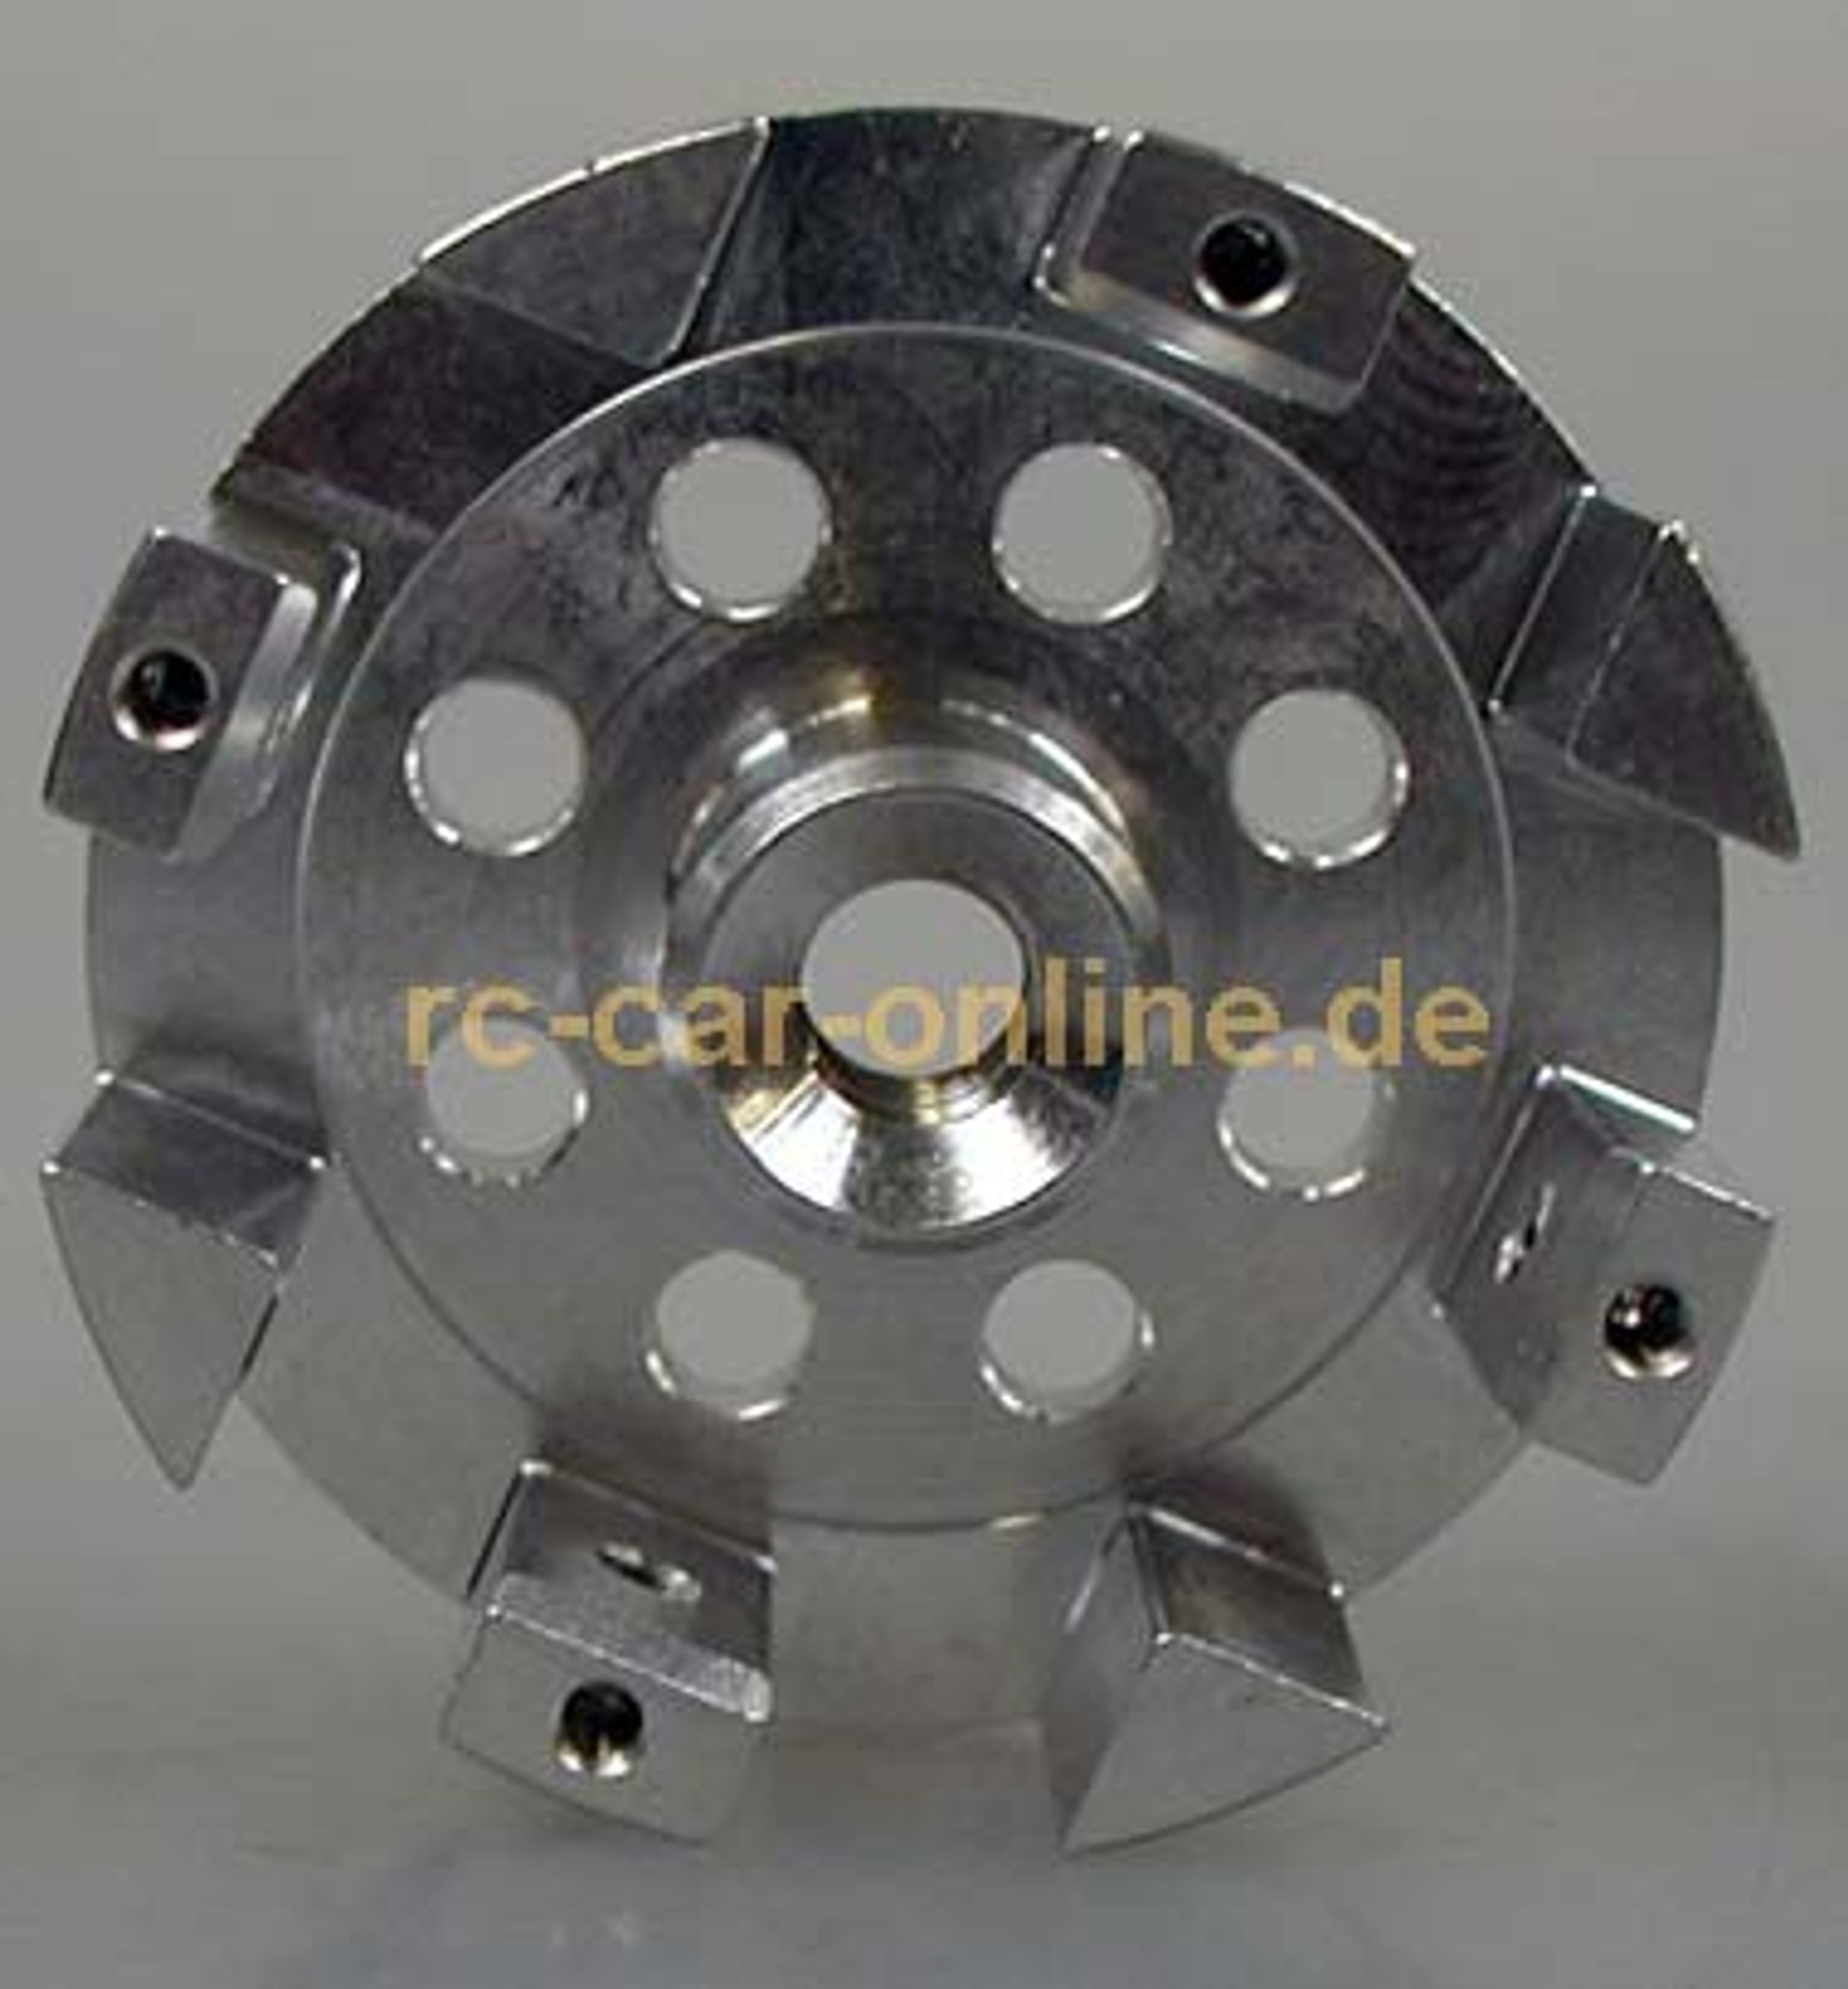 10531/01 FG Clutch carrier 05 for F1 - 1pce.